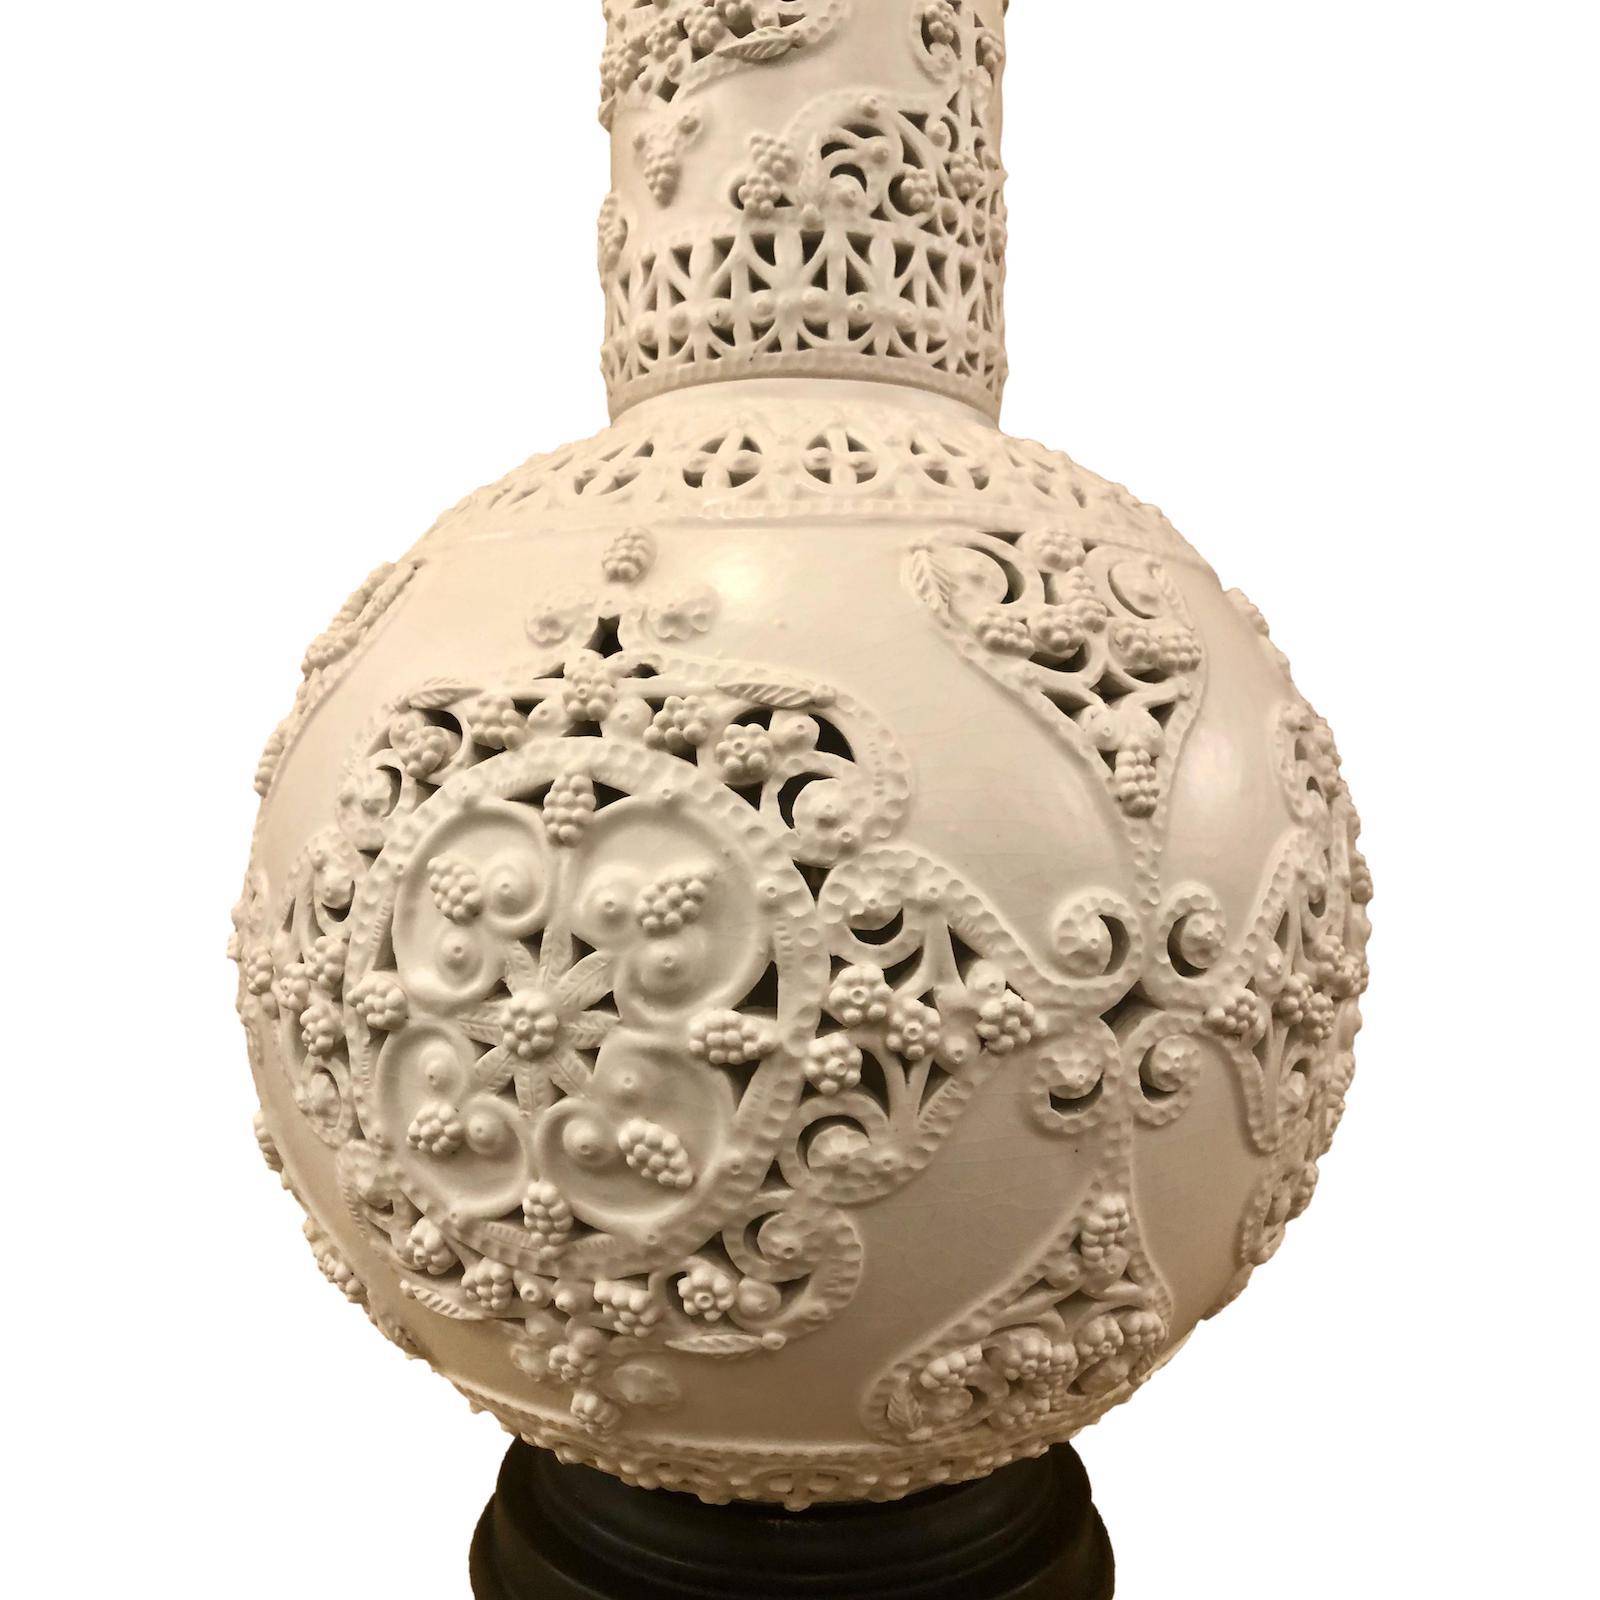 An Italian midcentury arabesque style porcelain table lamp.

Measurements:
Height of body: 30